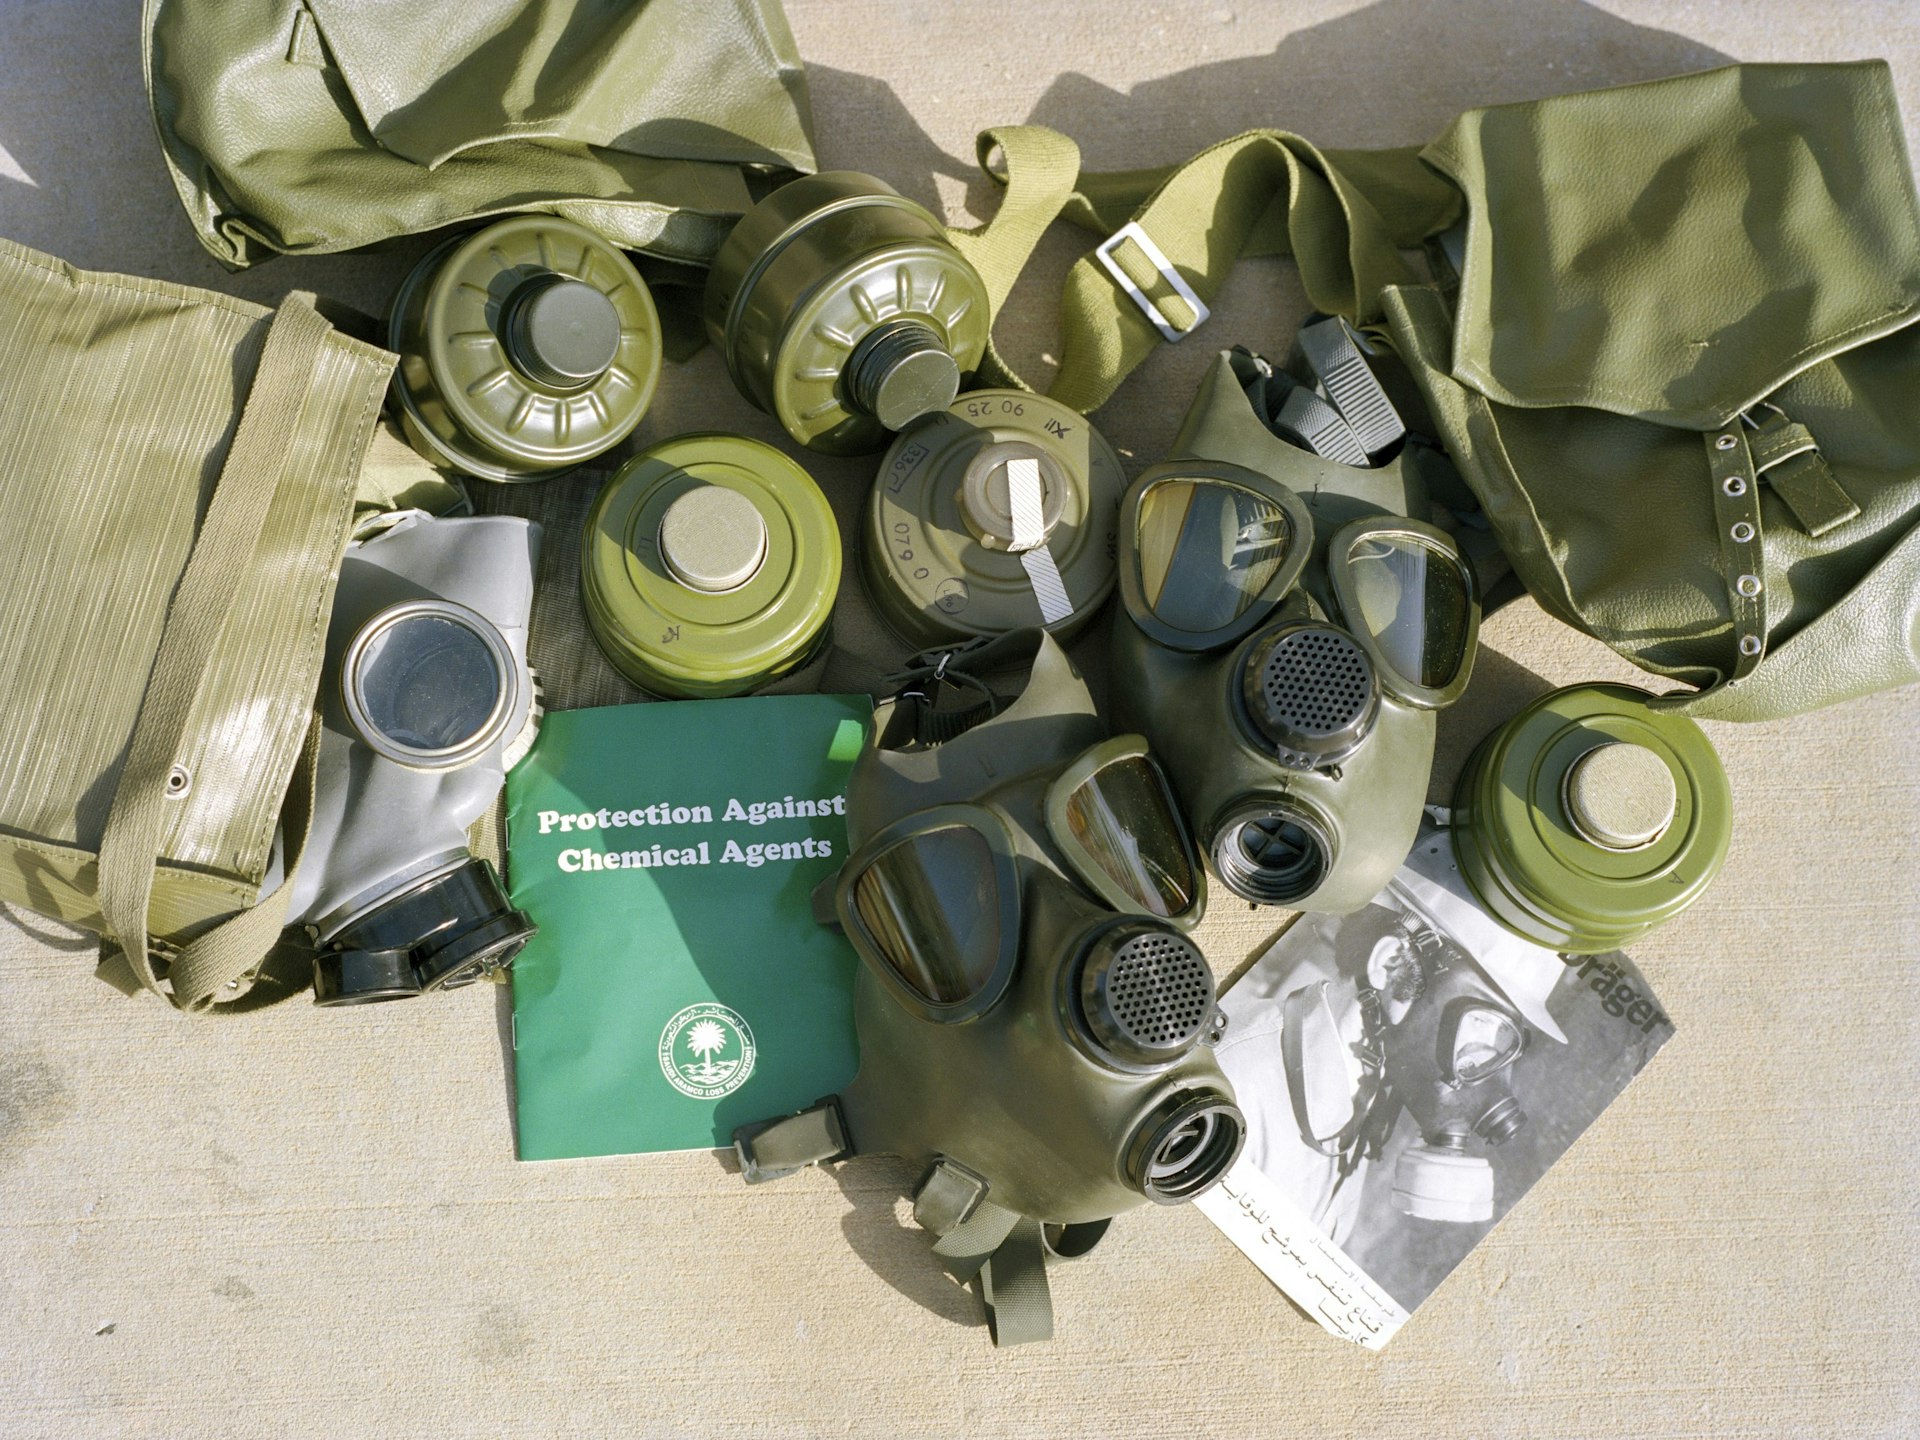 Gas masks issued to my family by Aramco during the Gulf War in 1990.